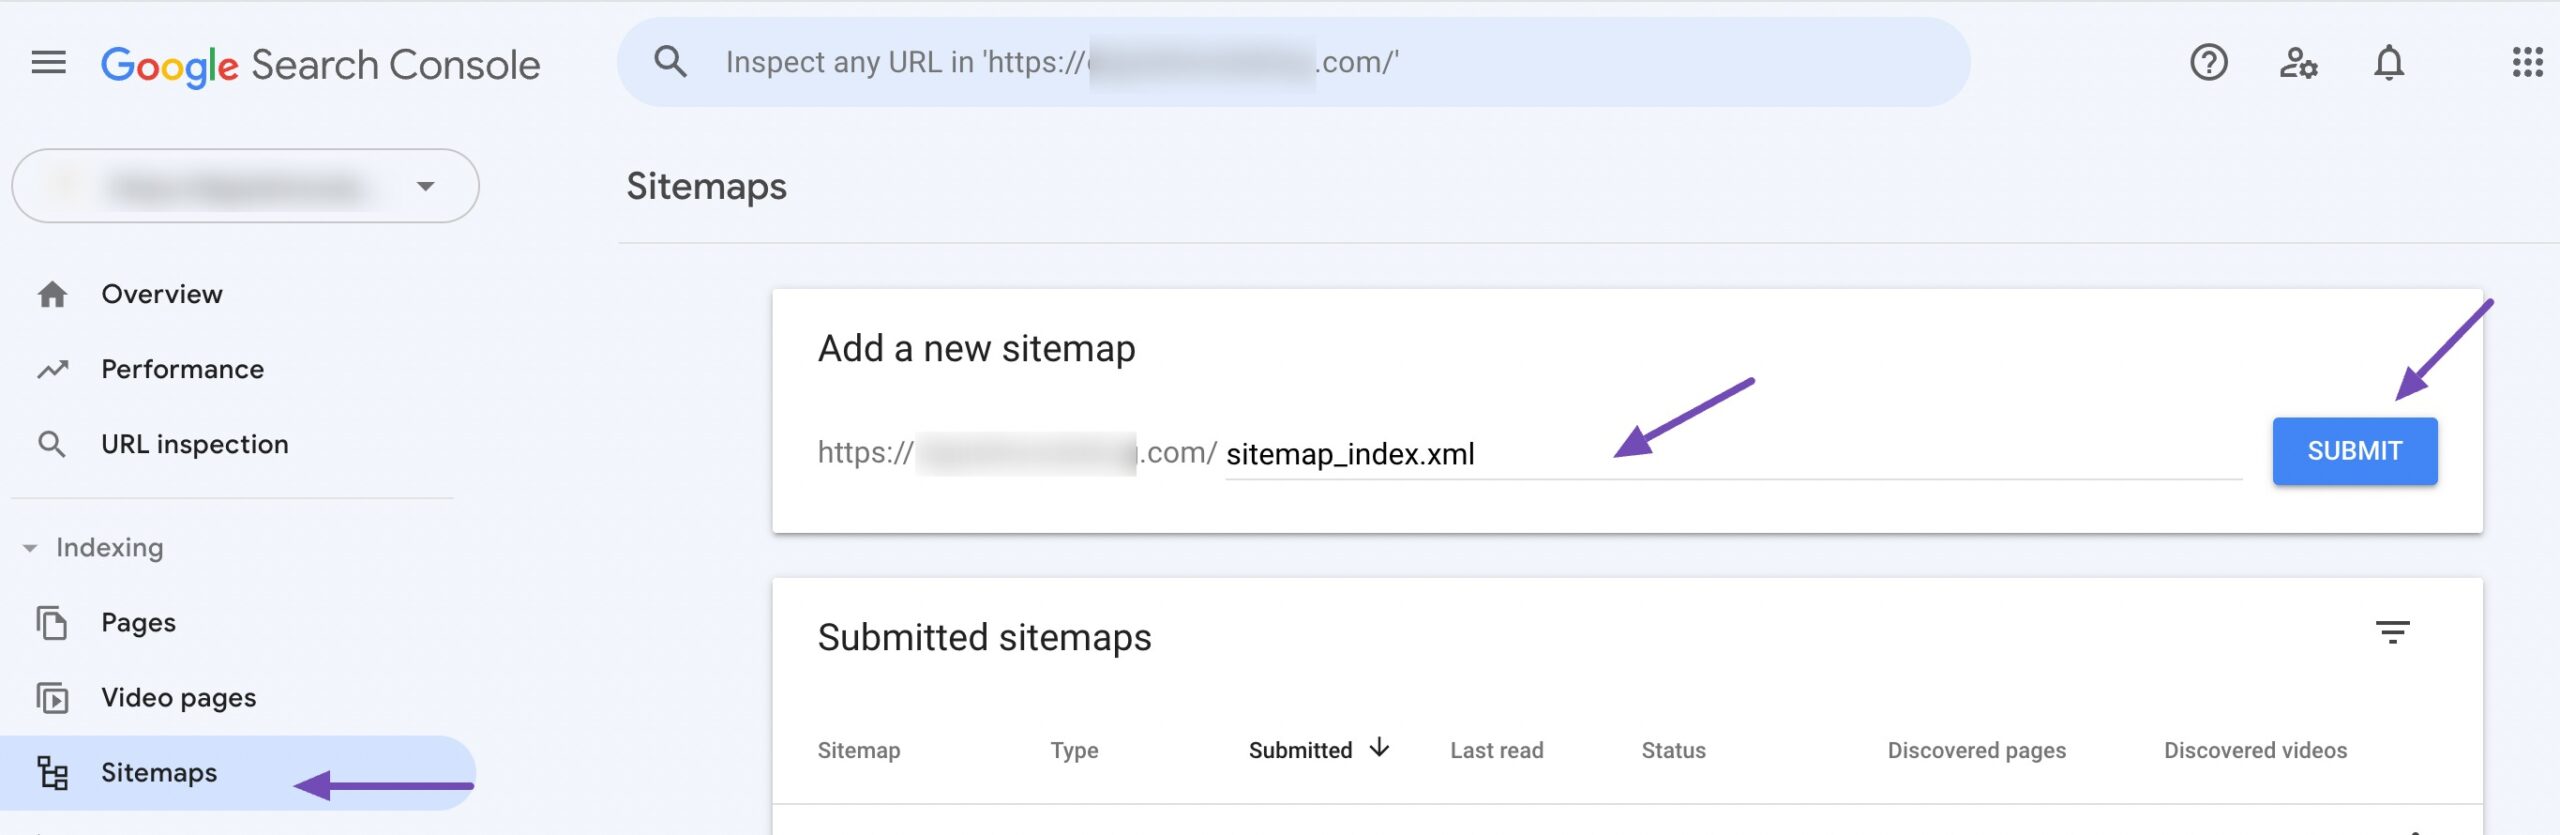 Submit sitemap in Google Search Console